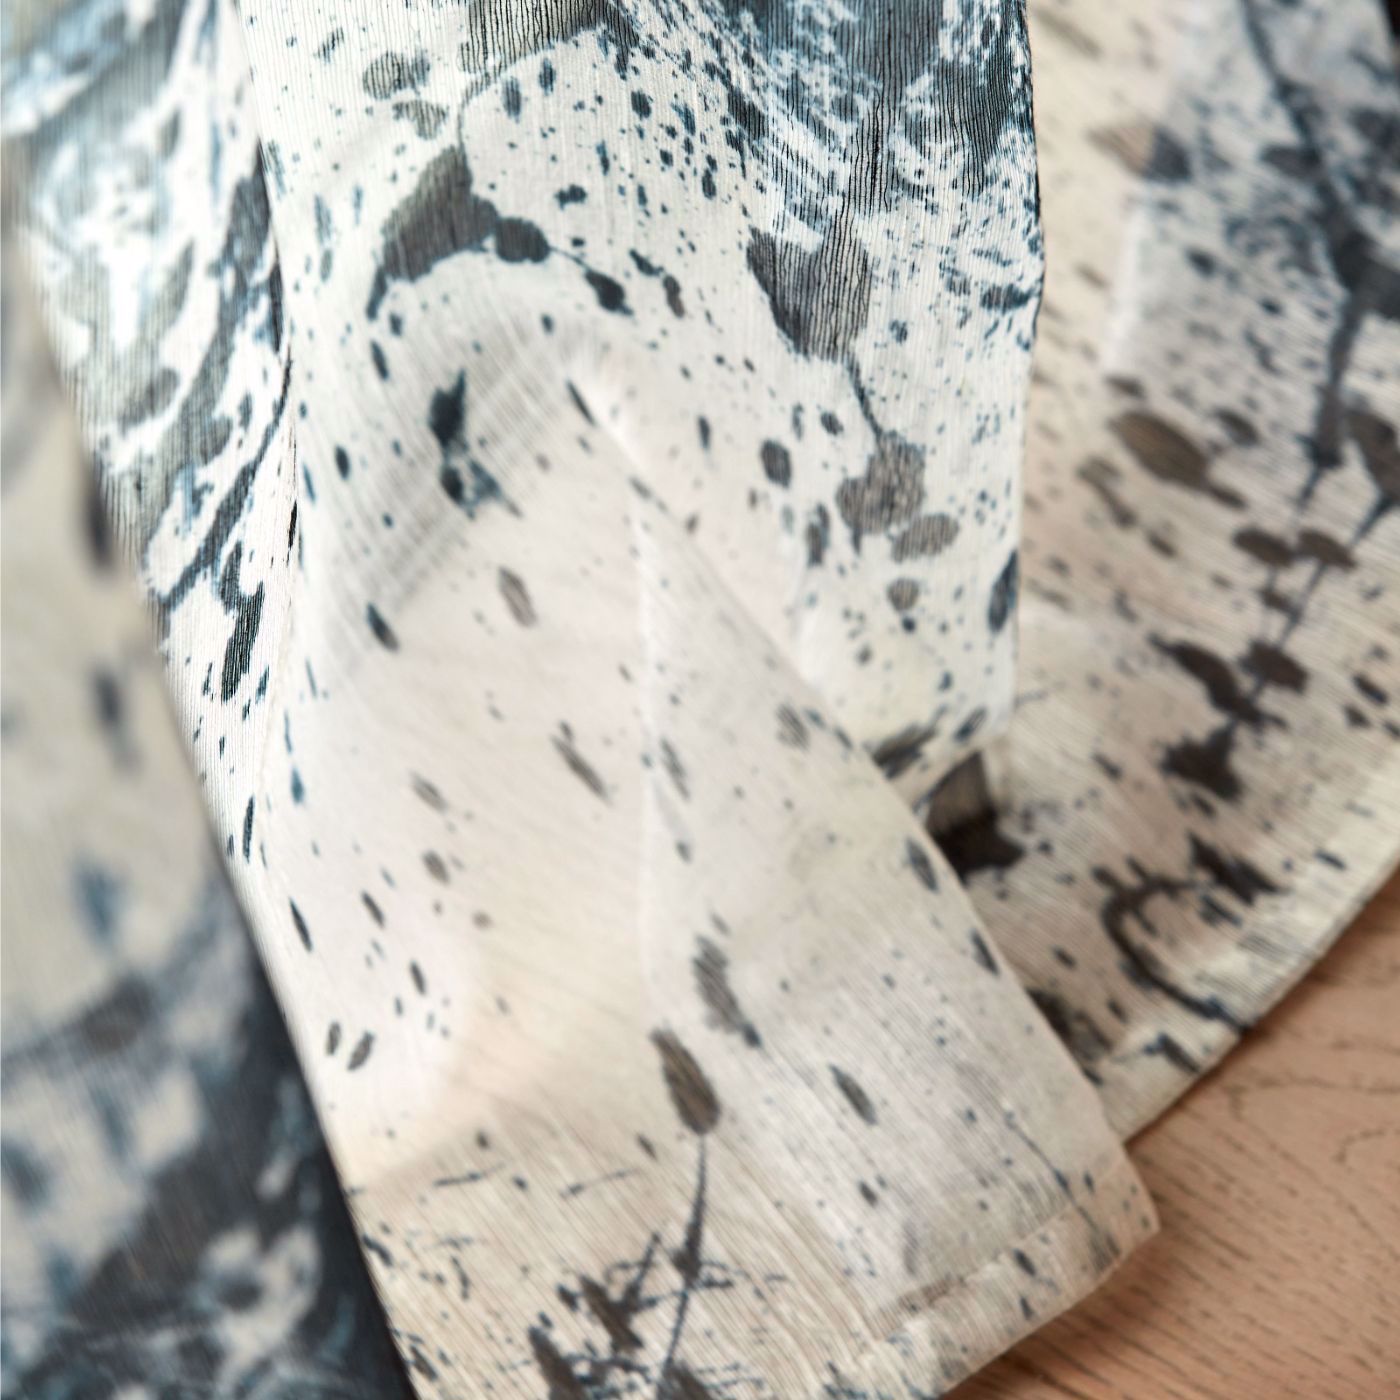 Enigmatic Sheer Japanese Ink Fabric by HAR